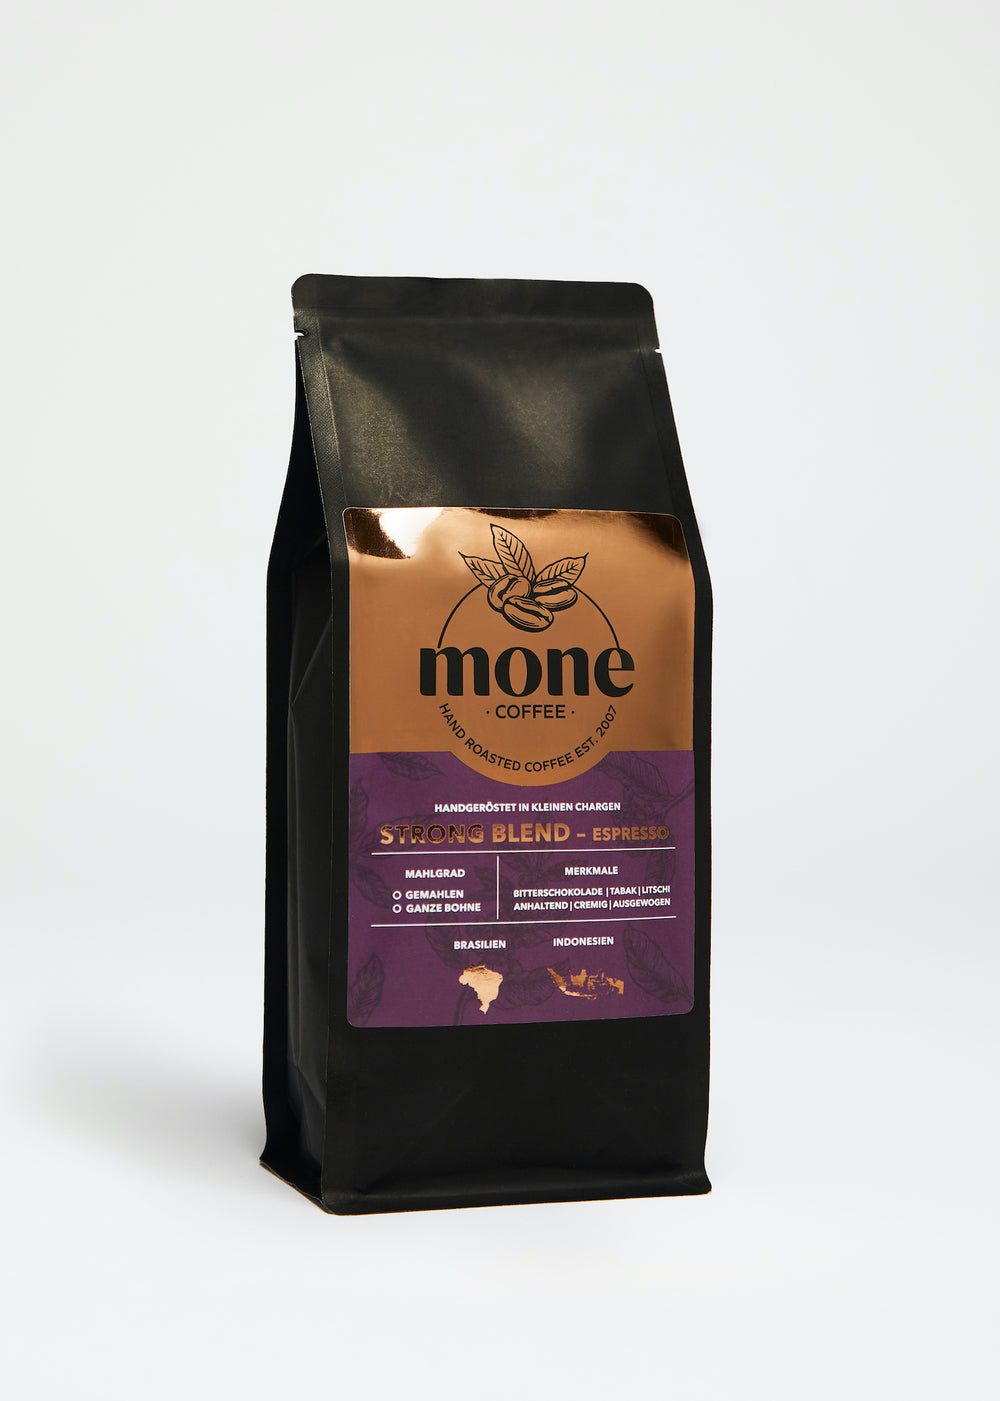 STRONG BLEND – ESPRESSO Abo